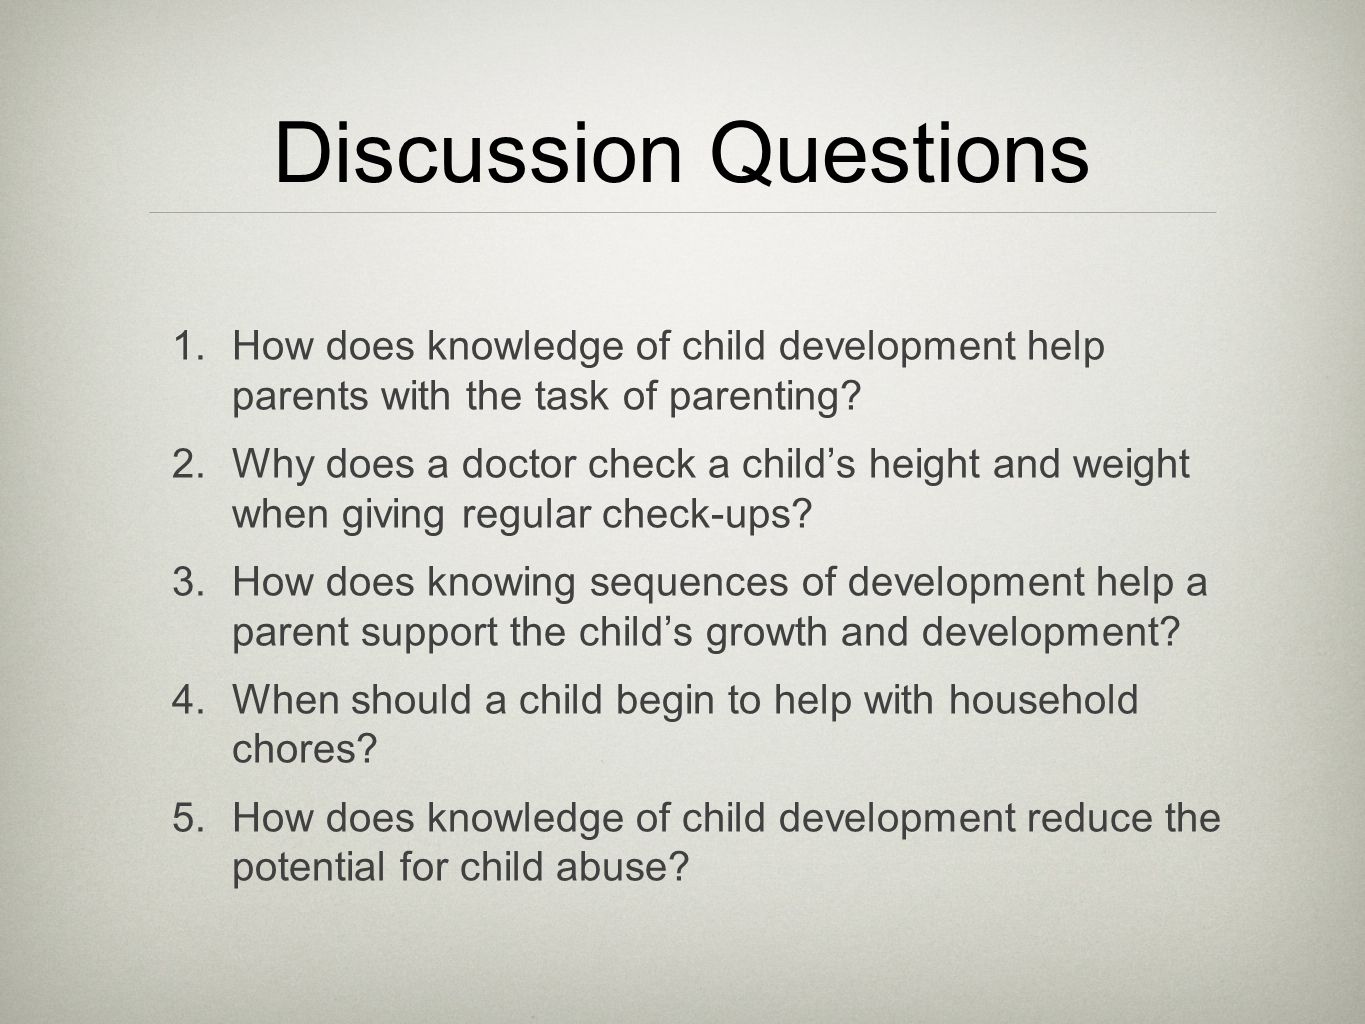 Discussion Questions 1.